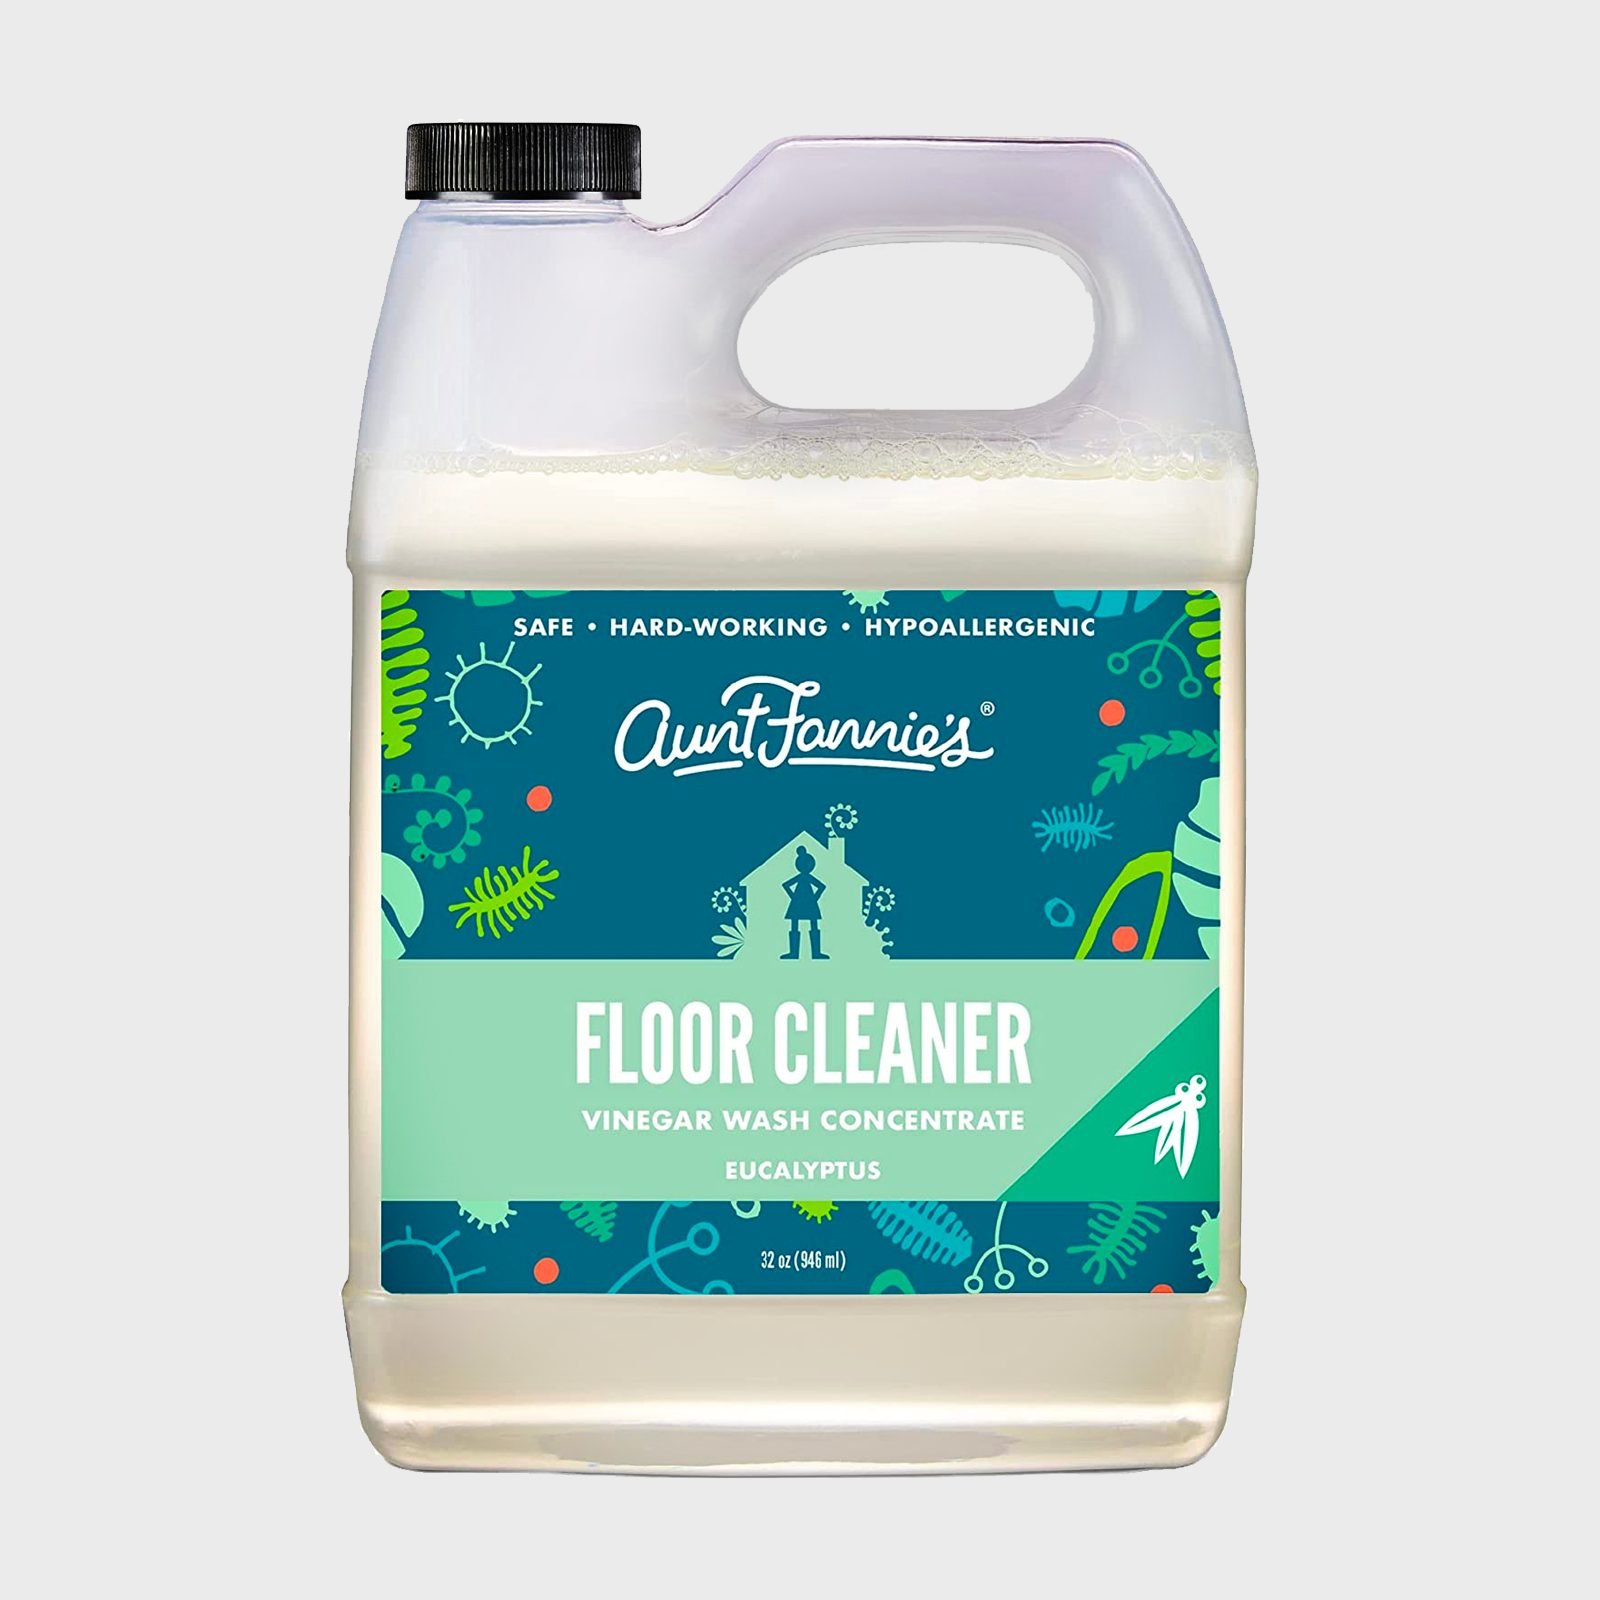 The Best Safe and Natural Cleaning Products for Your Home - Twelve